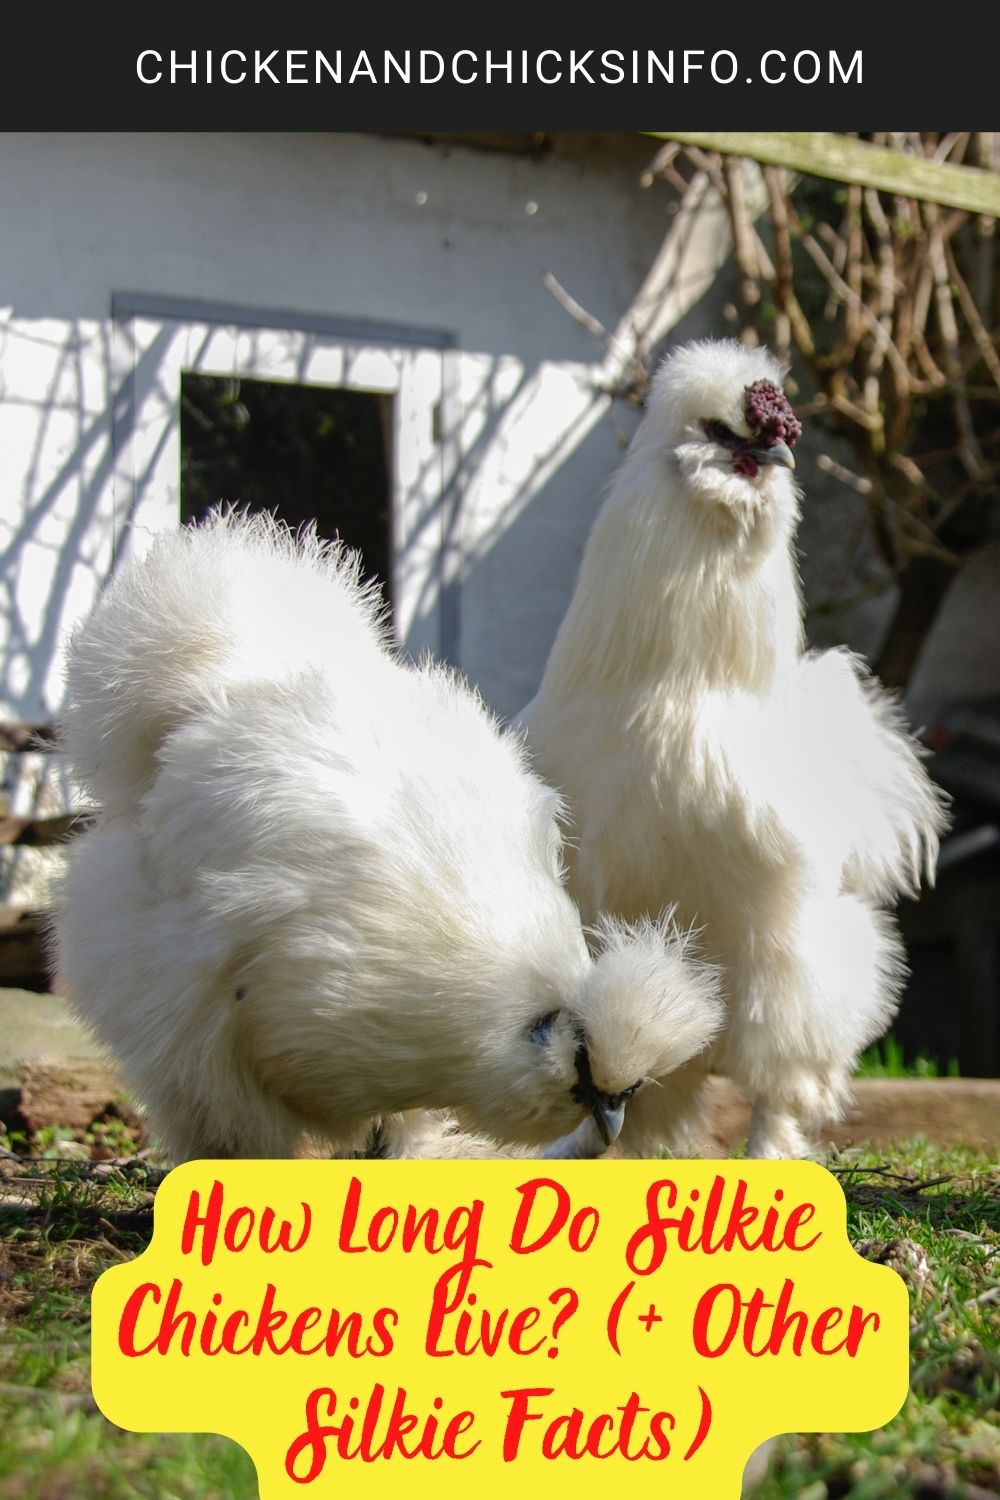 How Long Do Silkie Chickens Live? (+ Other Silkie Facts) poster.
